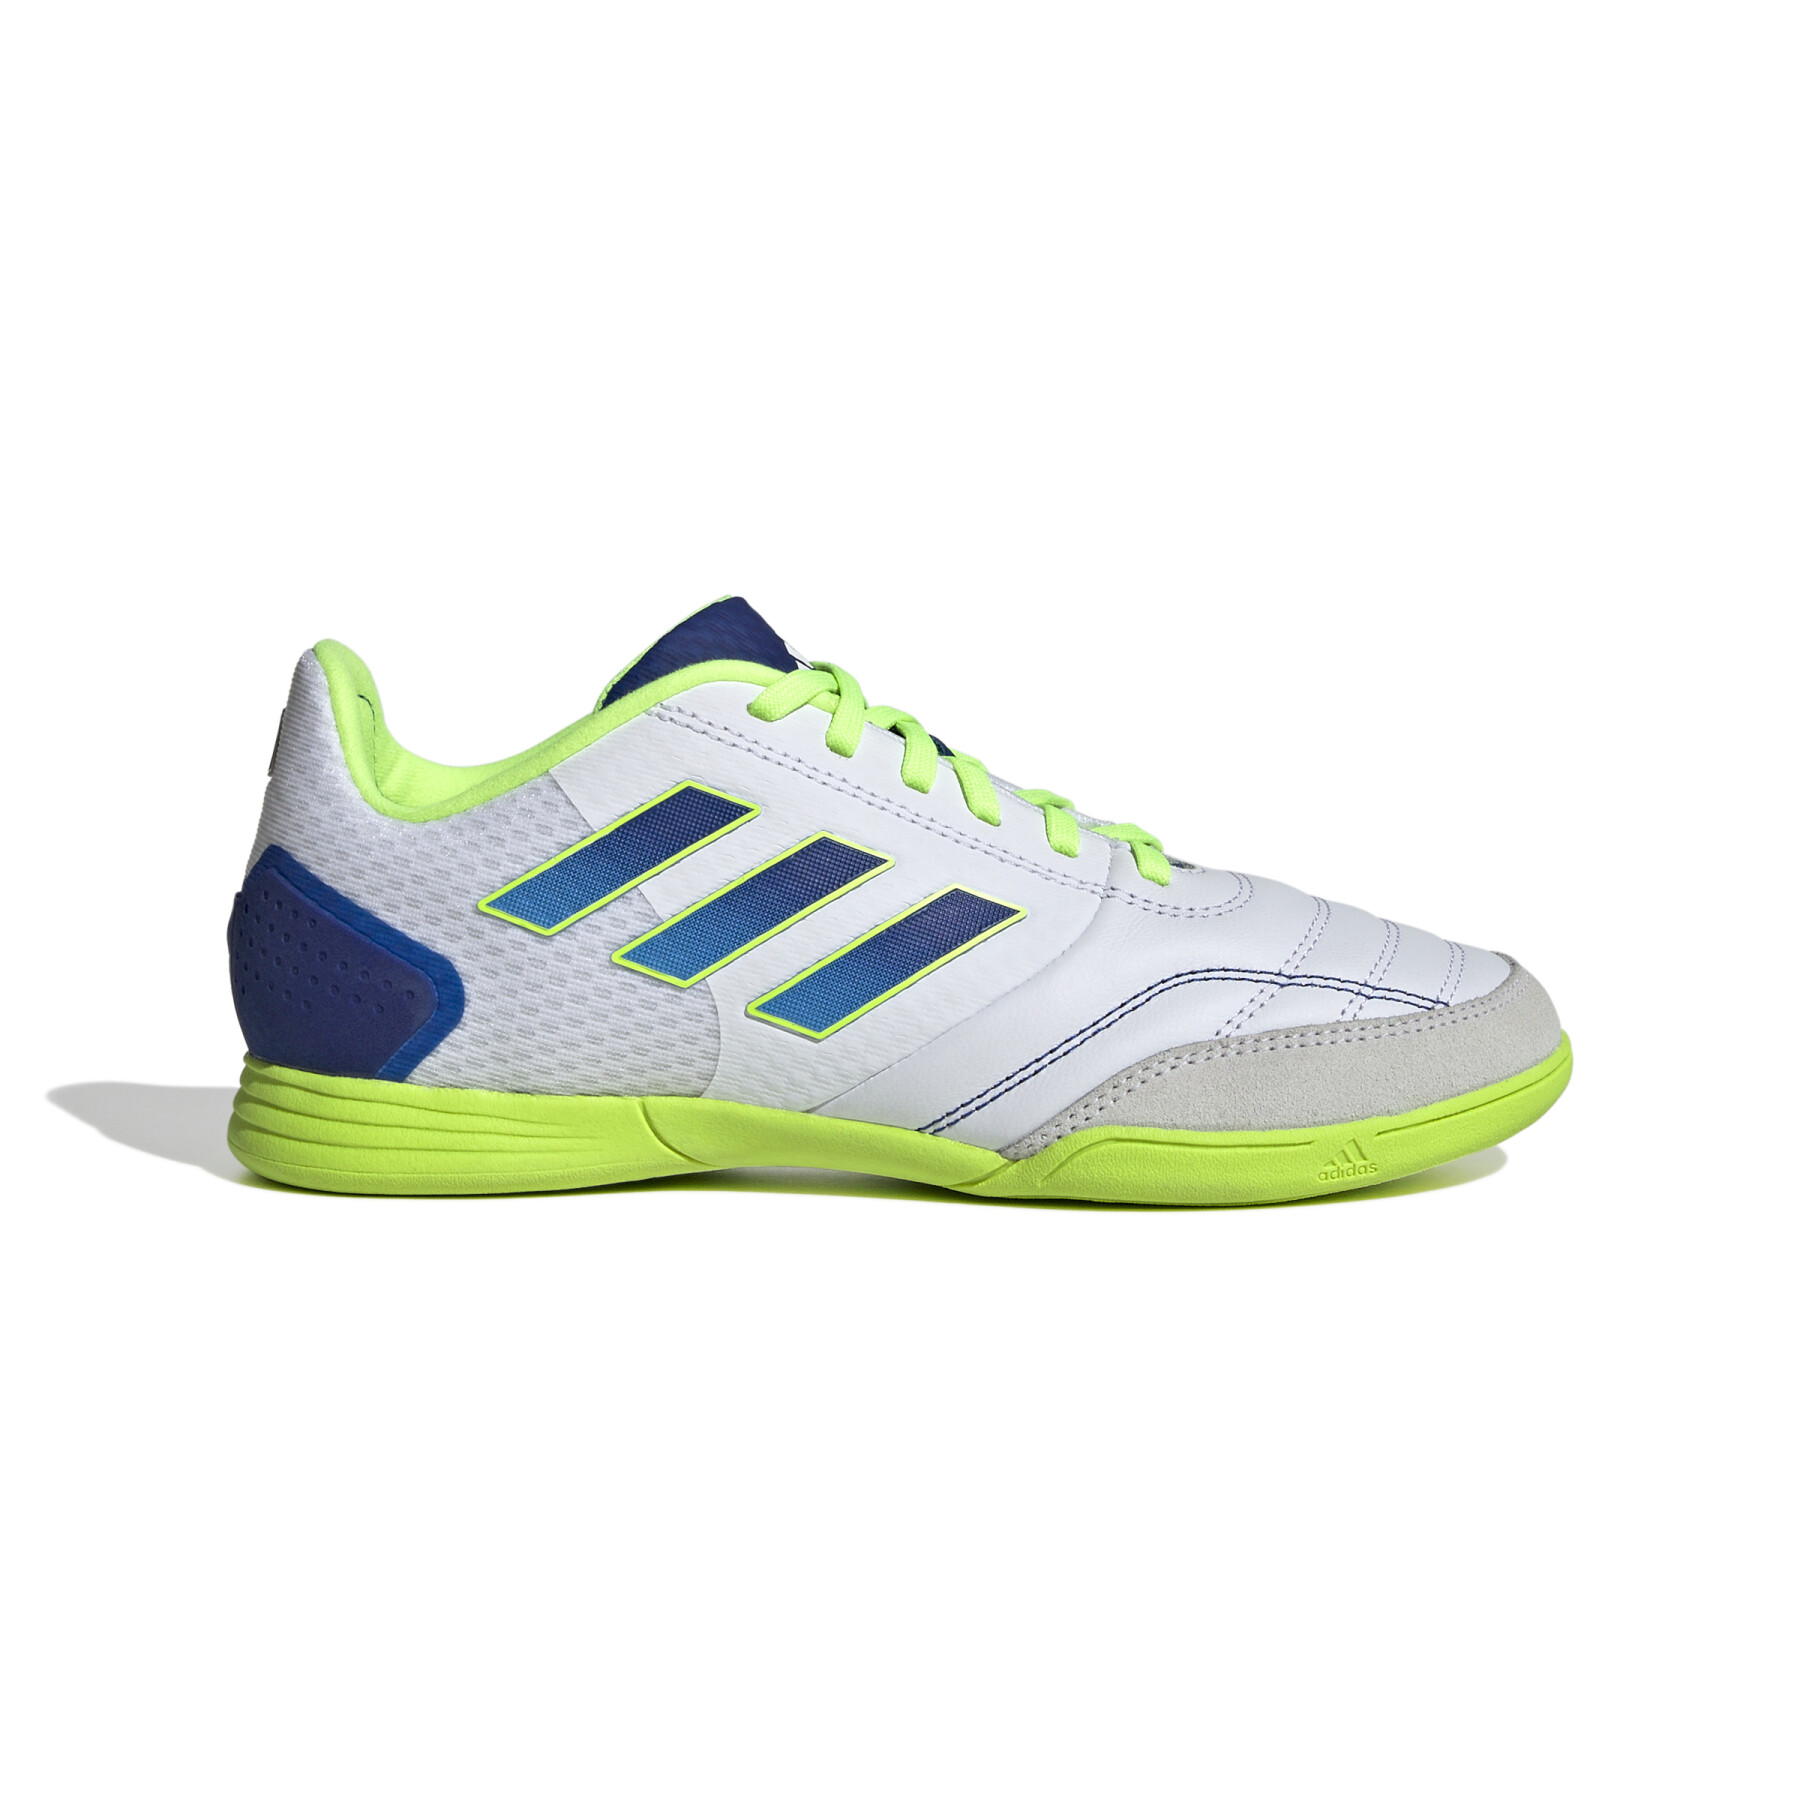 Children's soccer shoes adidas Top Sala Competition Indoor